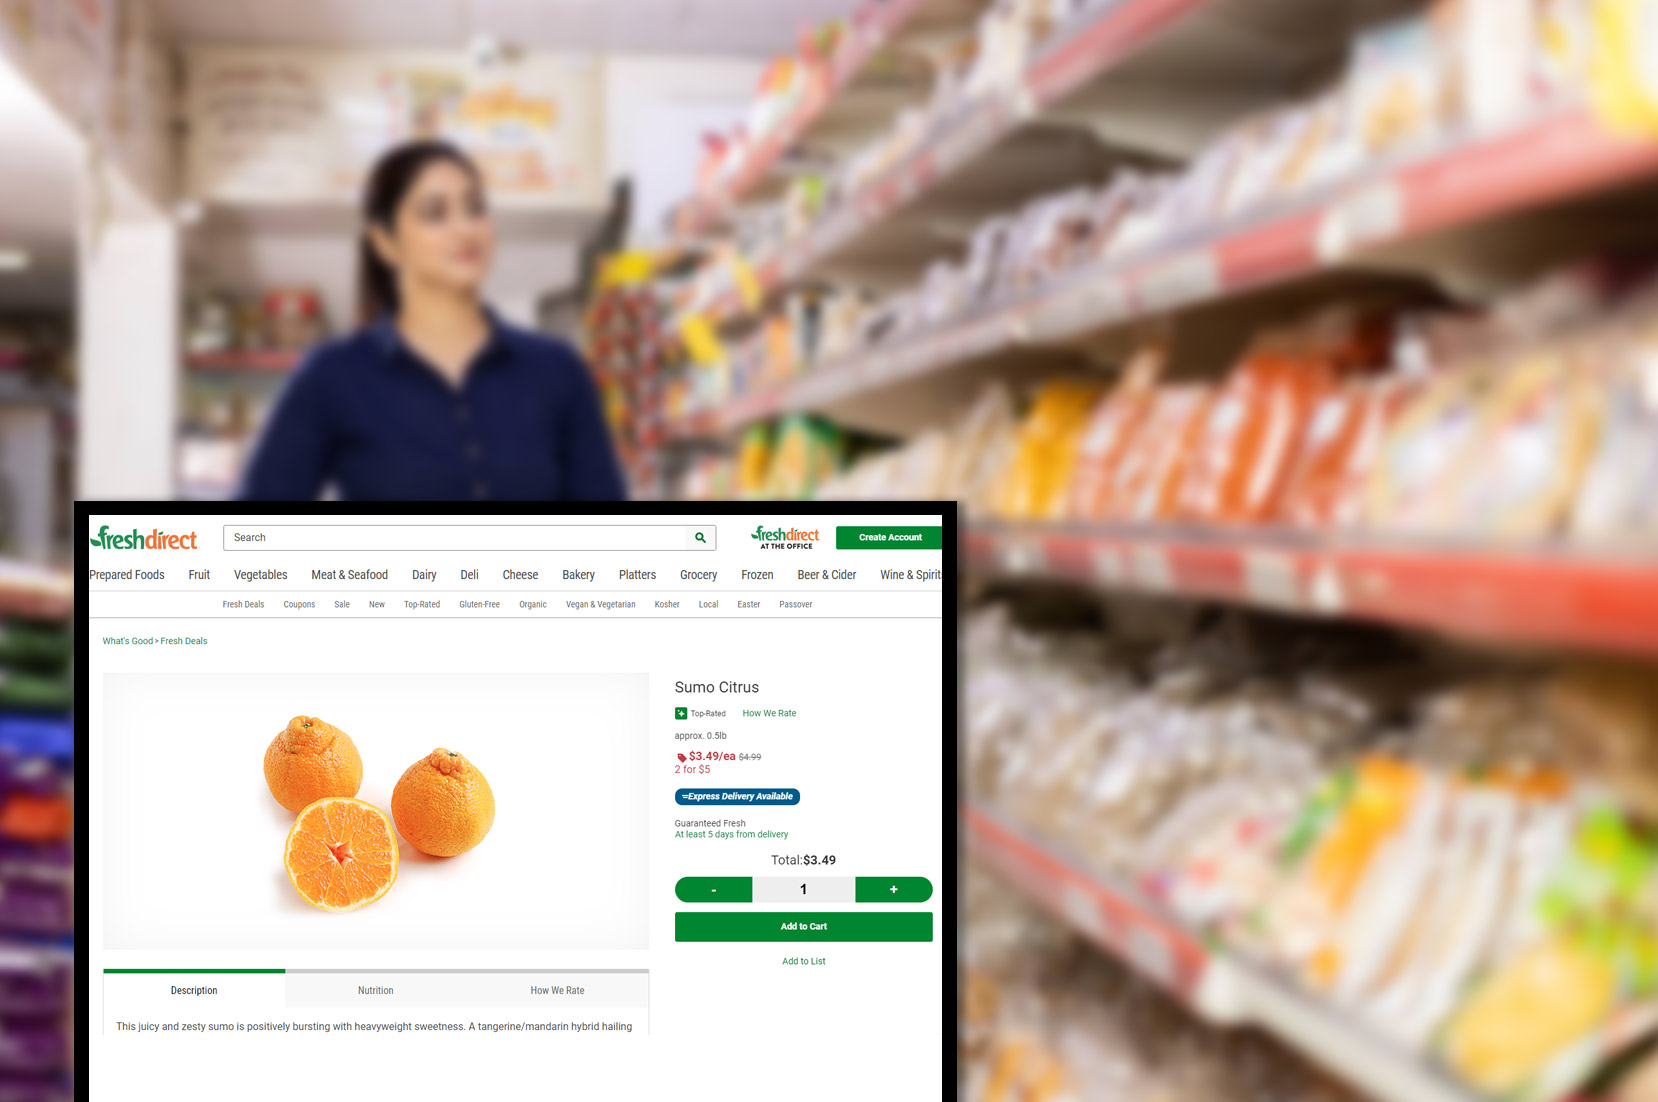 freshdirect-comproduct-pricing-information-and-image-scraping-services